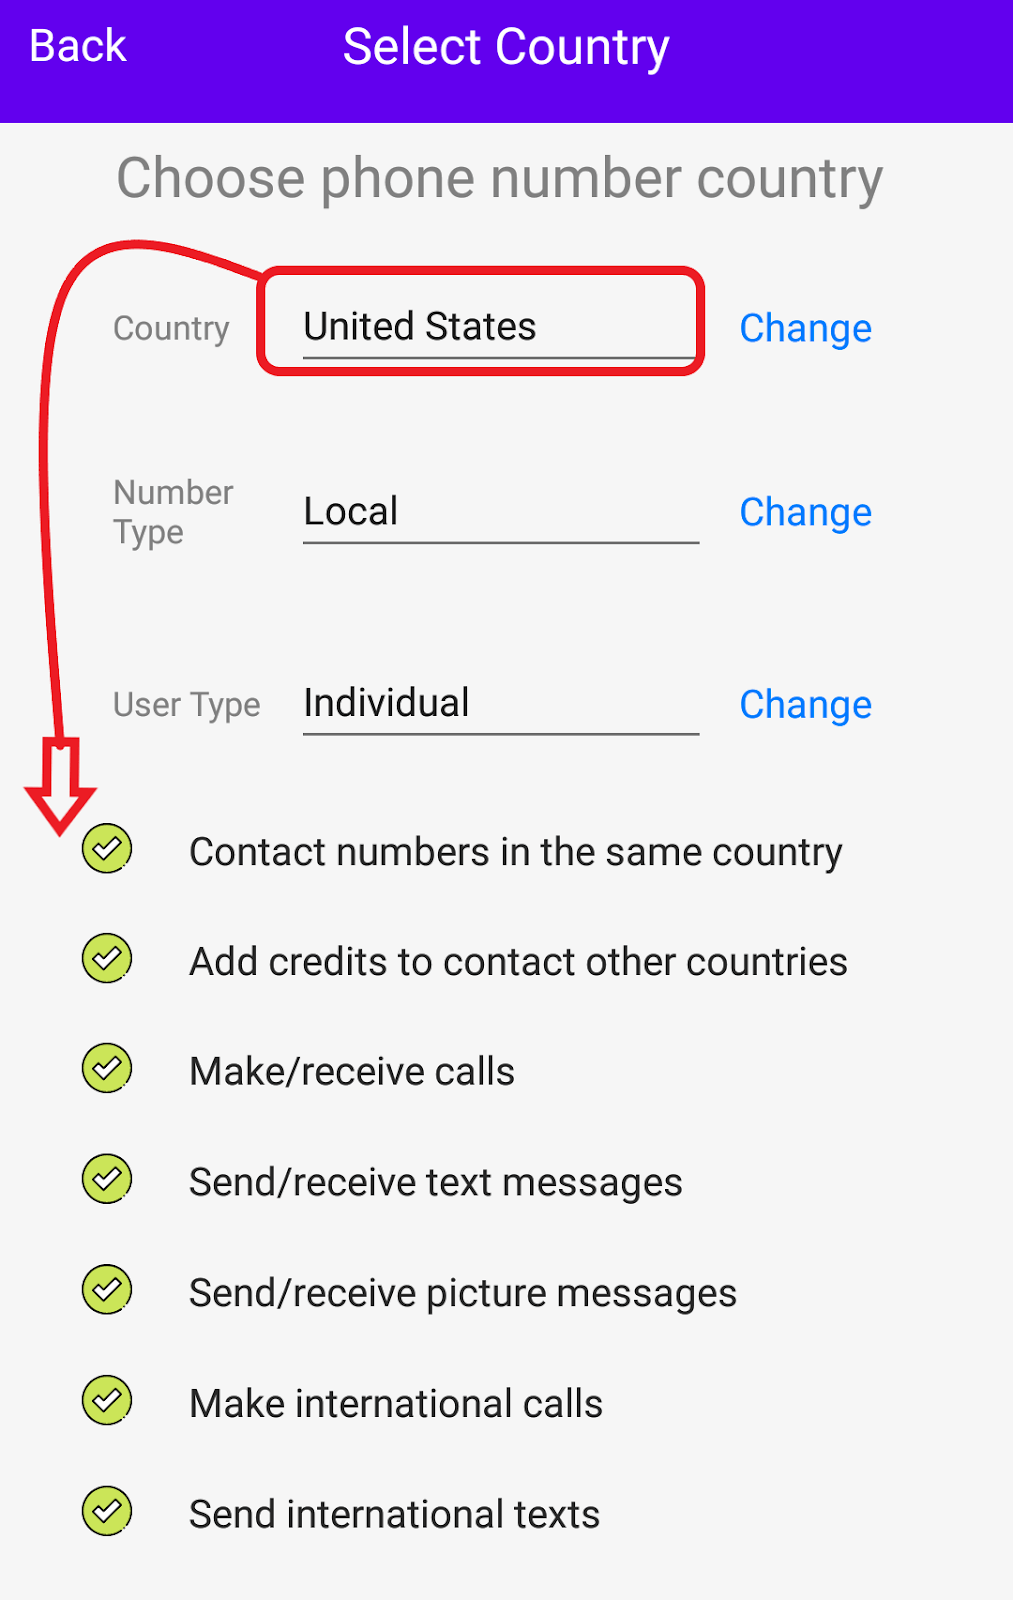 services on the list with ✅ are accessible for your country choice